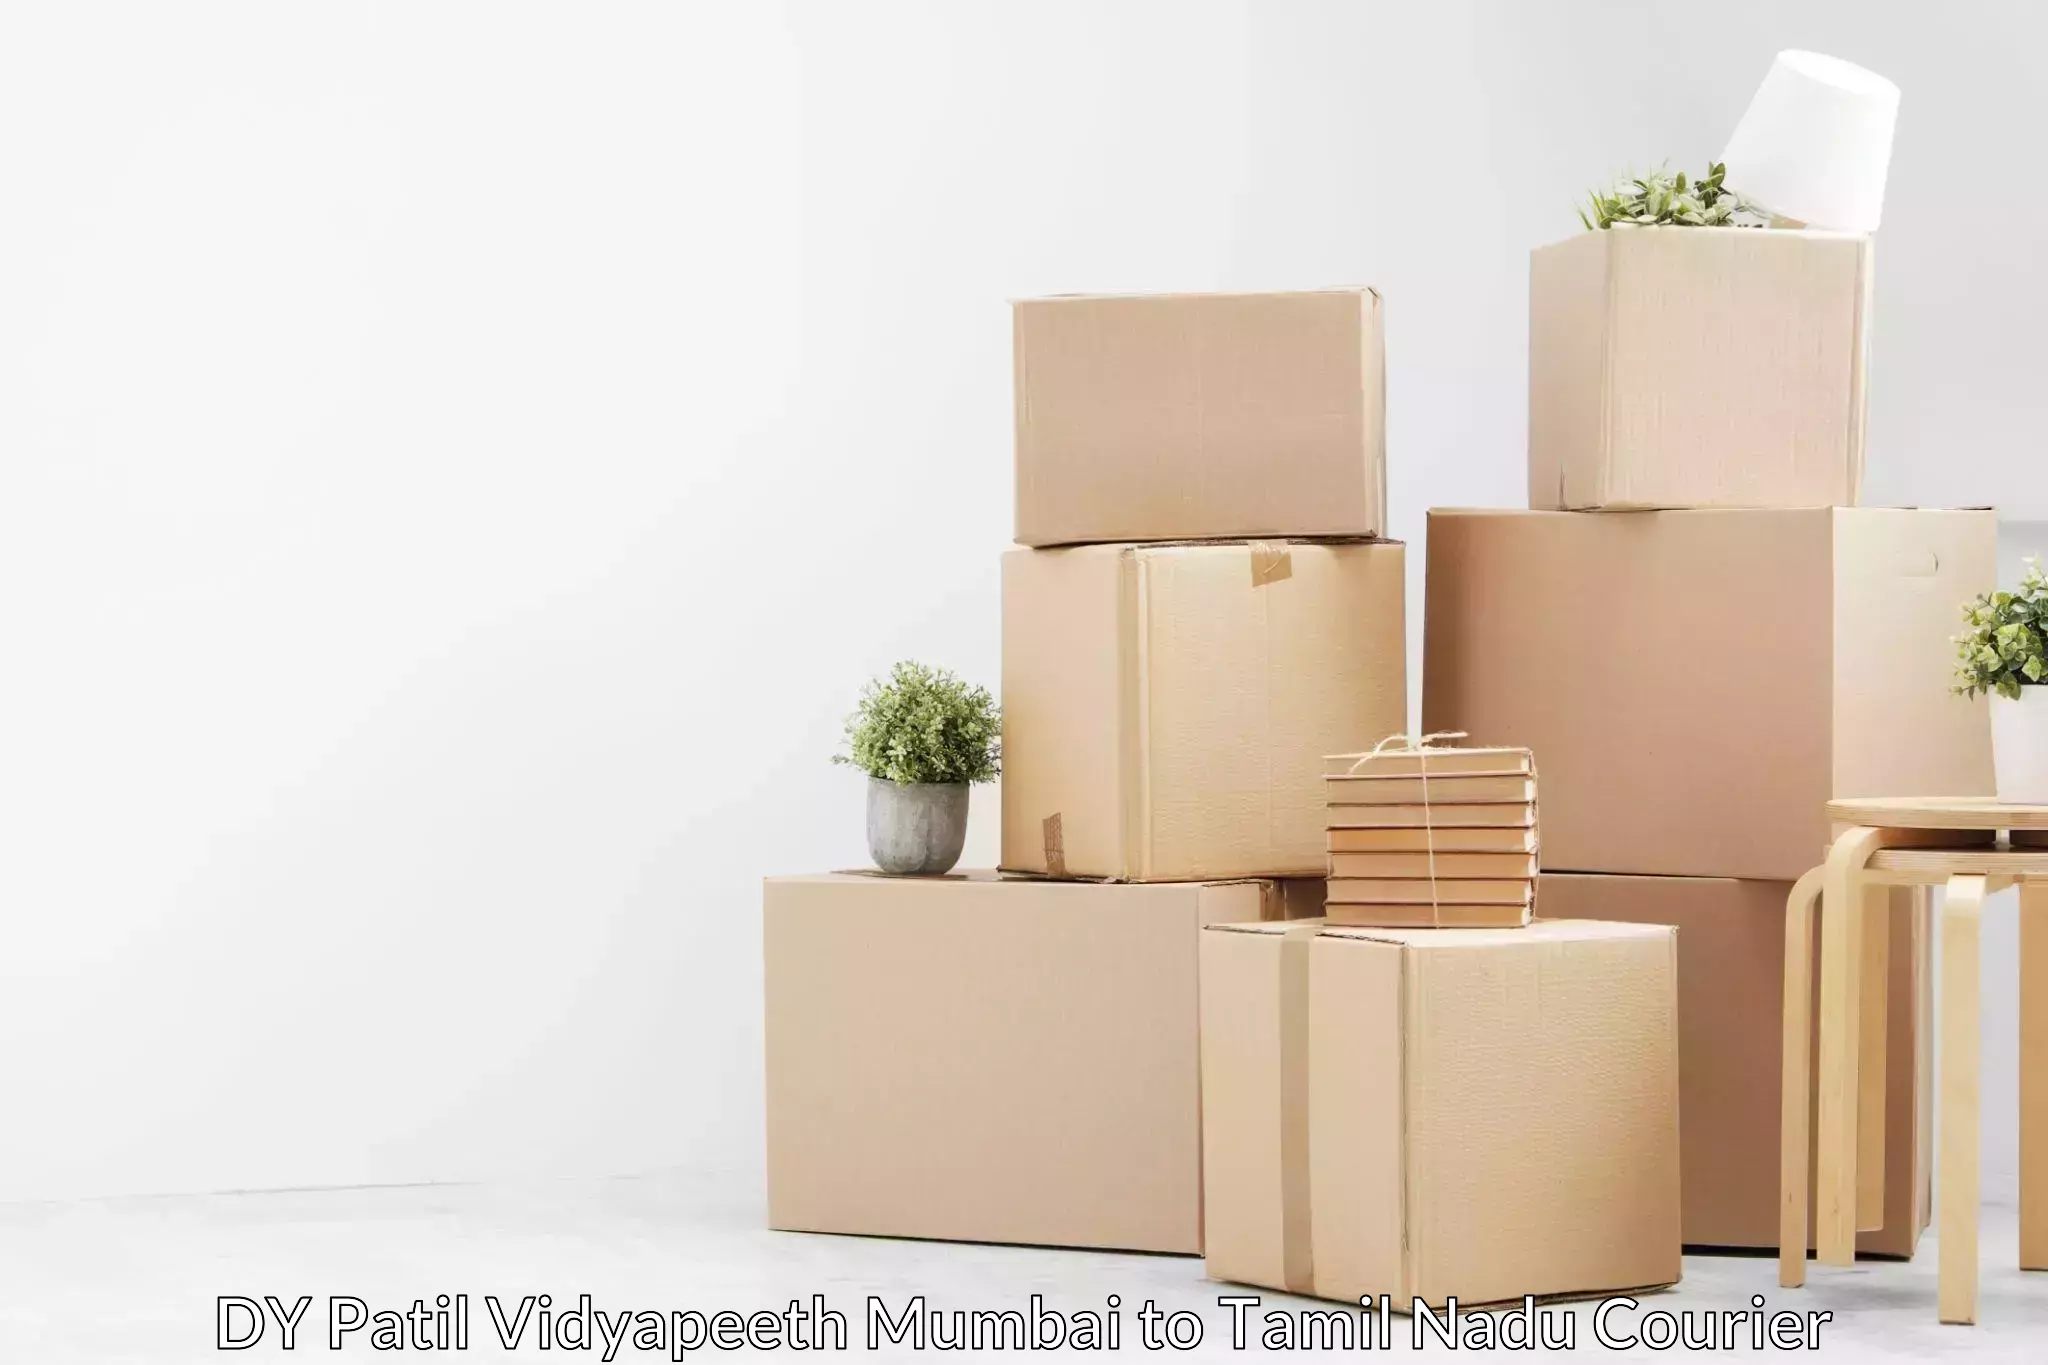 Trusted relocation services DY Patil Vidyapeeth Mumbai to Chennai Port